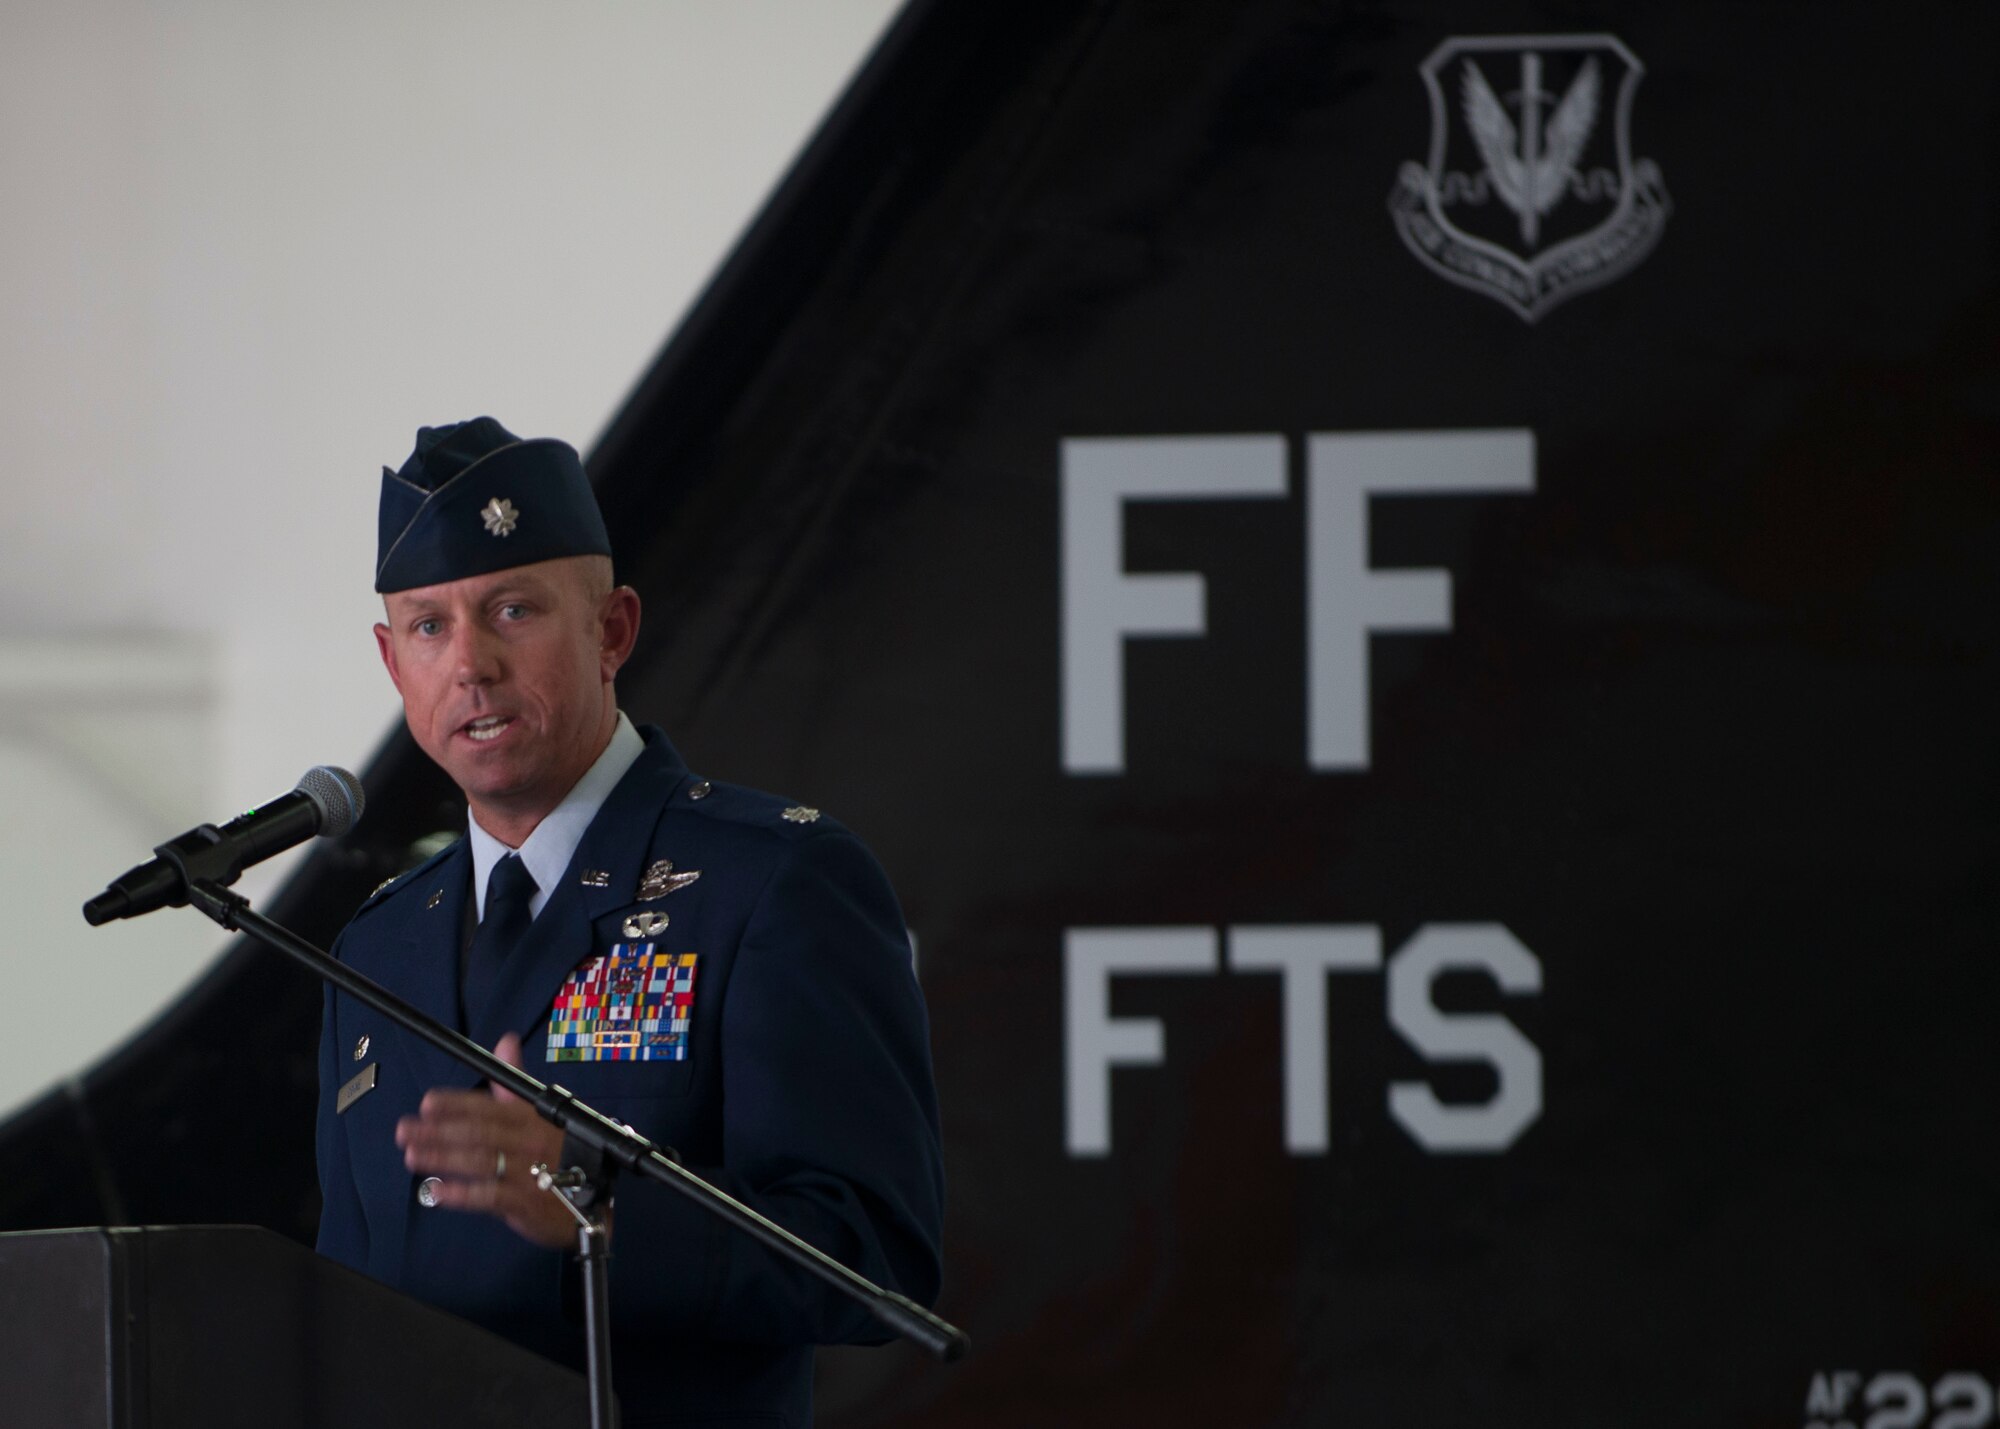 U.S. Air Force Lt. Col. Brian Coyne, 71st Fighter Training Squadron commander, speaks during the unit’s reactivation ceremony at Langley Air Force Base, Va., Aug. 21, 2015. Over the course of its history, the 71st Fighter Squadron saw combat in numerous conflicts across the globe including World War II, Operations Northern Watch, Southern Watch and Iraqi Freedom, and was credited with the first air-to-air victory in Desert Storm and earned numerous accolades, including three Presidential Unit Citations, eleven Air Force Outstanding Unit Awards and five Hughes Achievement Trophies. (U.S. Air Force photo by Staff Sgt. John D. Strong II/Released)